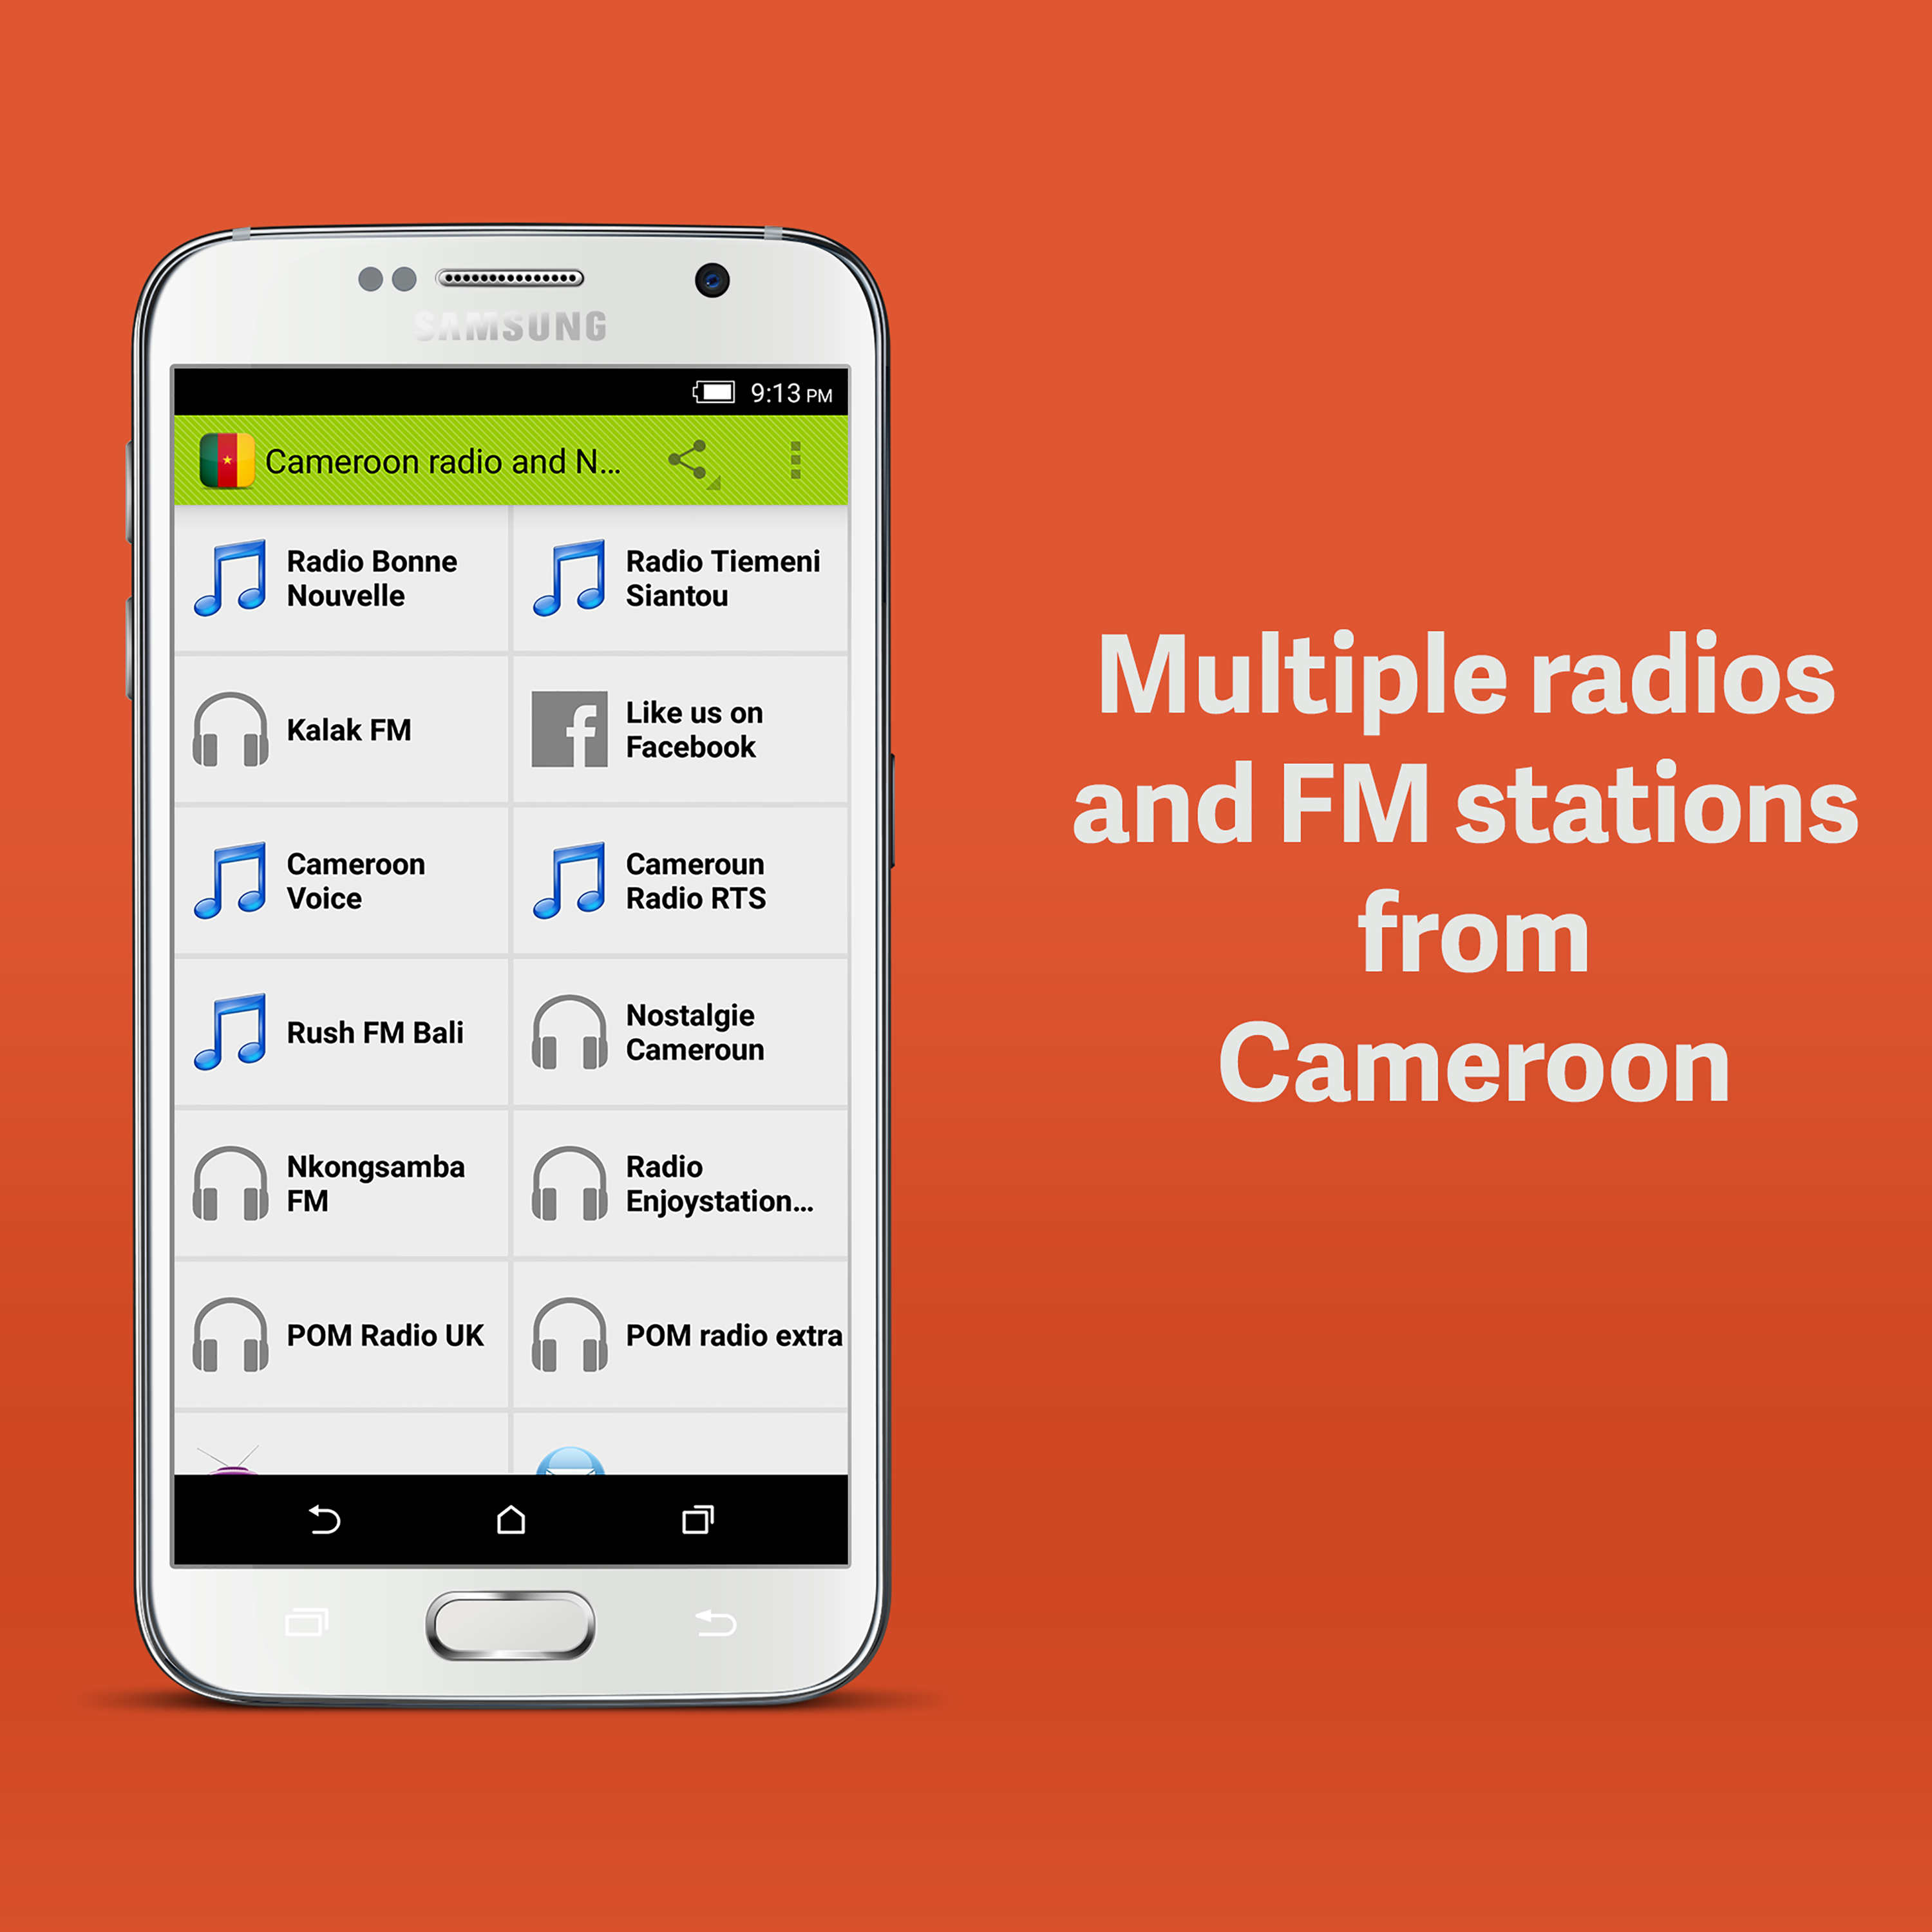 Cameroon Radio APK 2.2 for Android – Download Cameroon Radio APK Latest  Version from APKFab.com